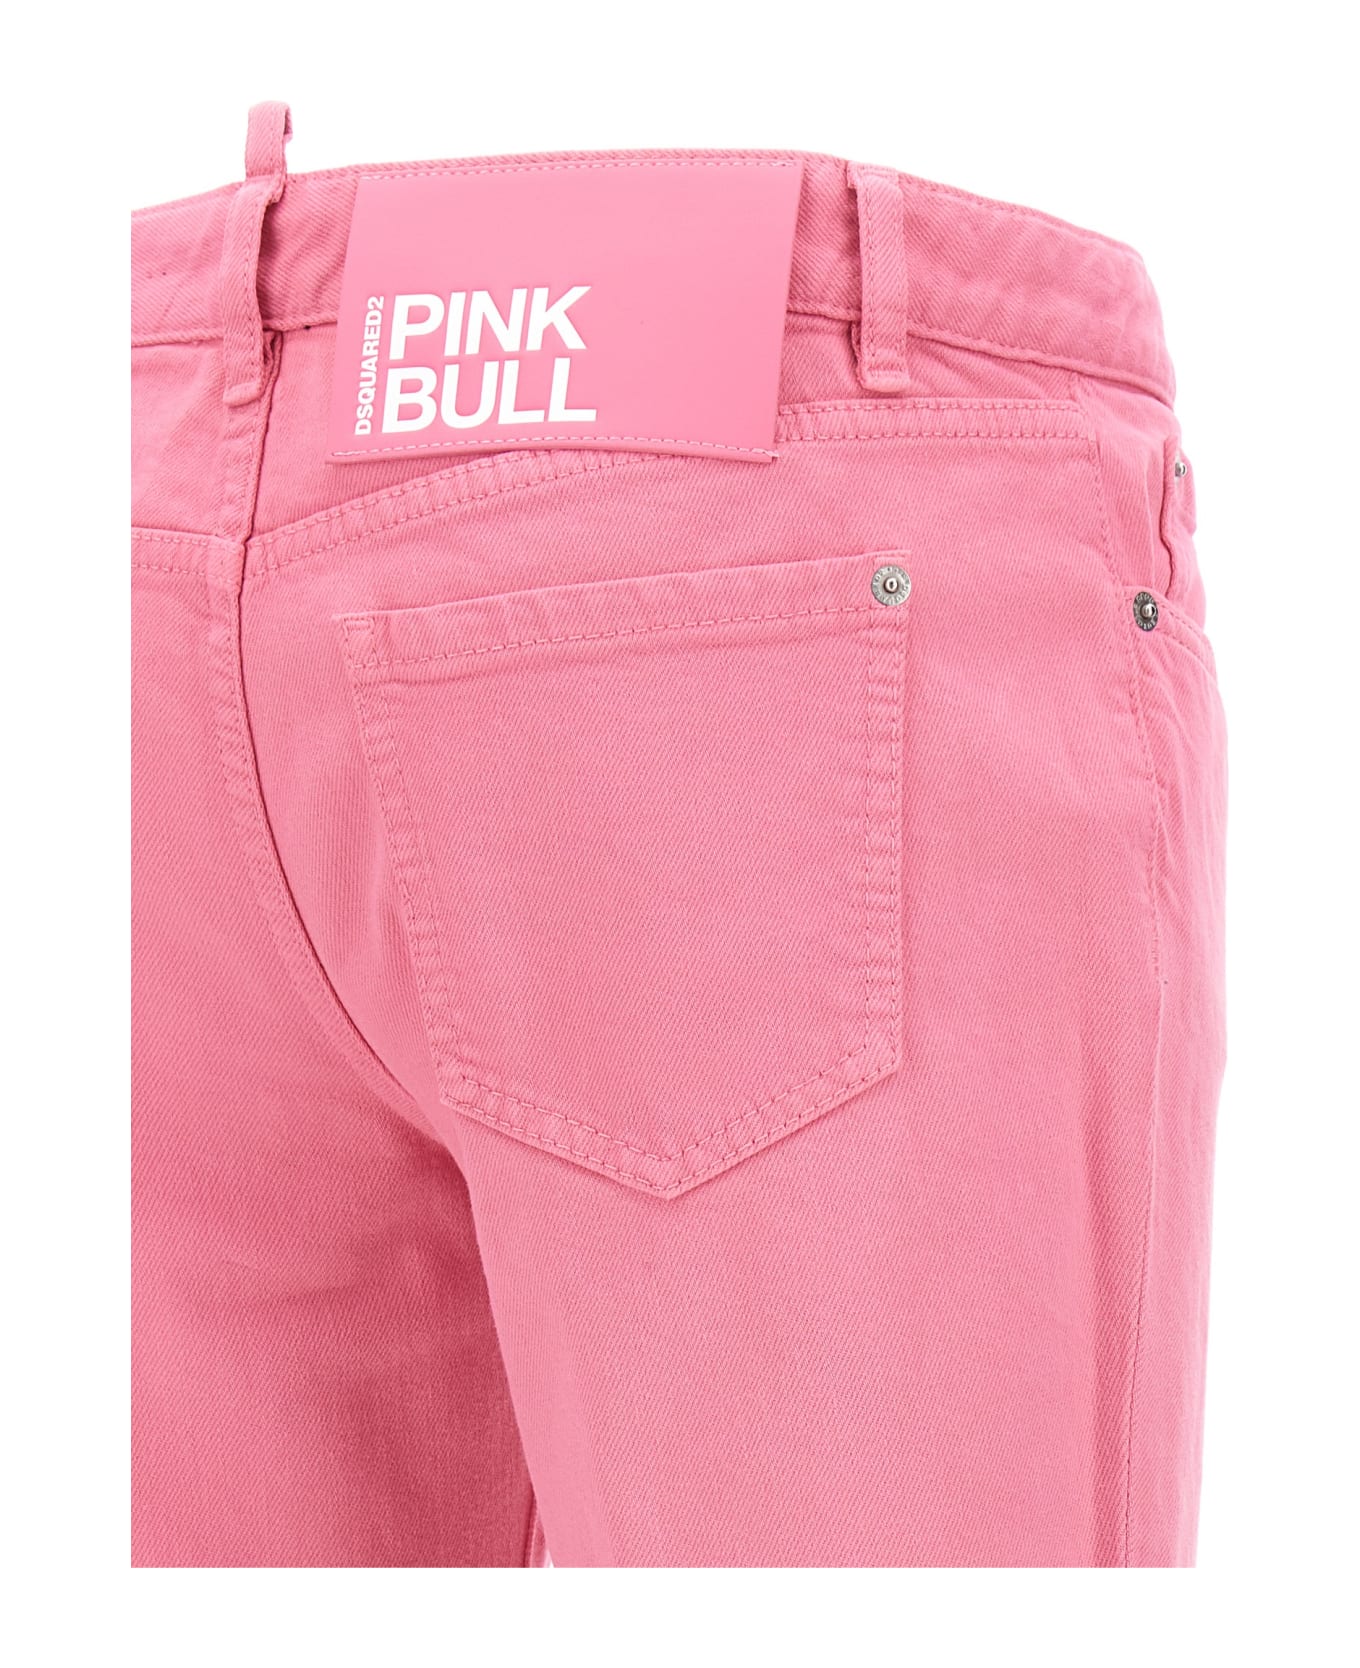 Dsquared2 Flare Jeans - Pink